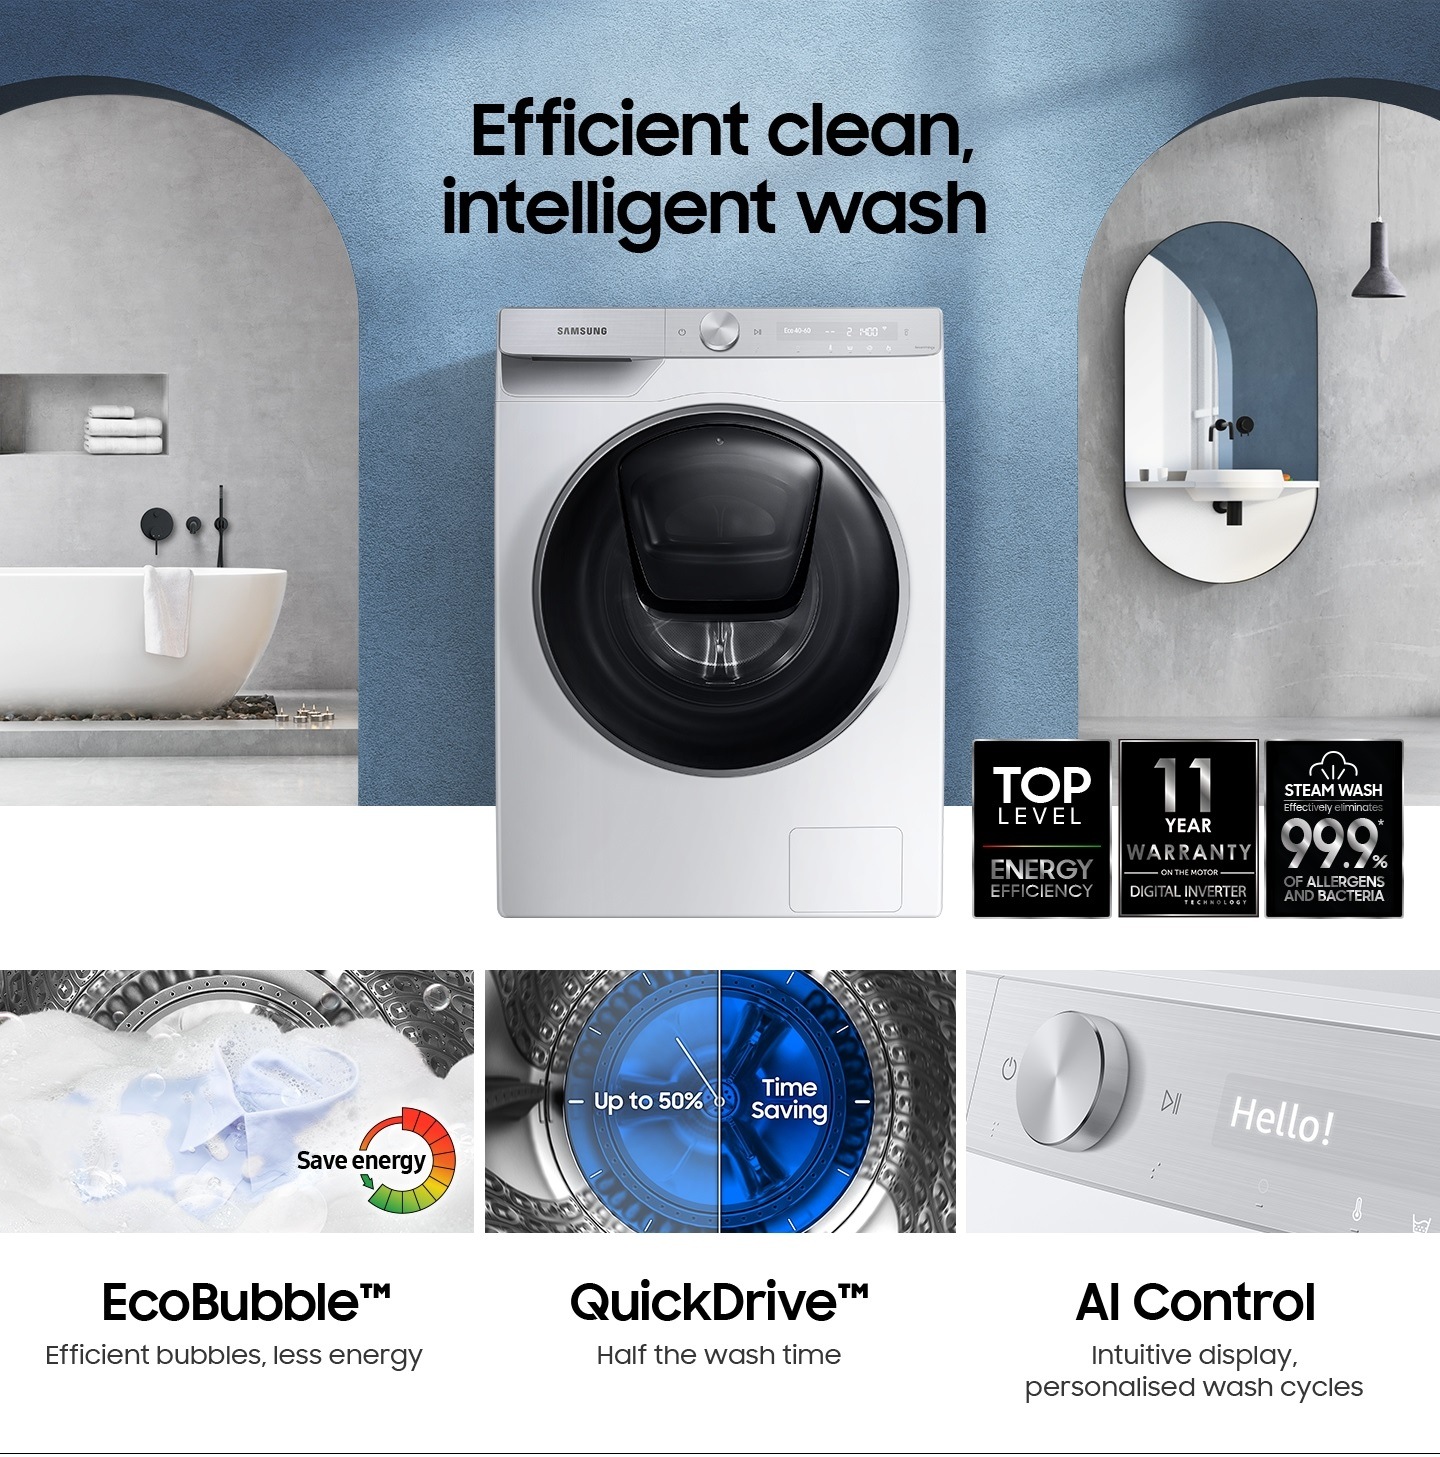 WW7500T is germ-free, and 11-year warranty with EcoBubble, QuickDrive, and AI Control functions.